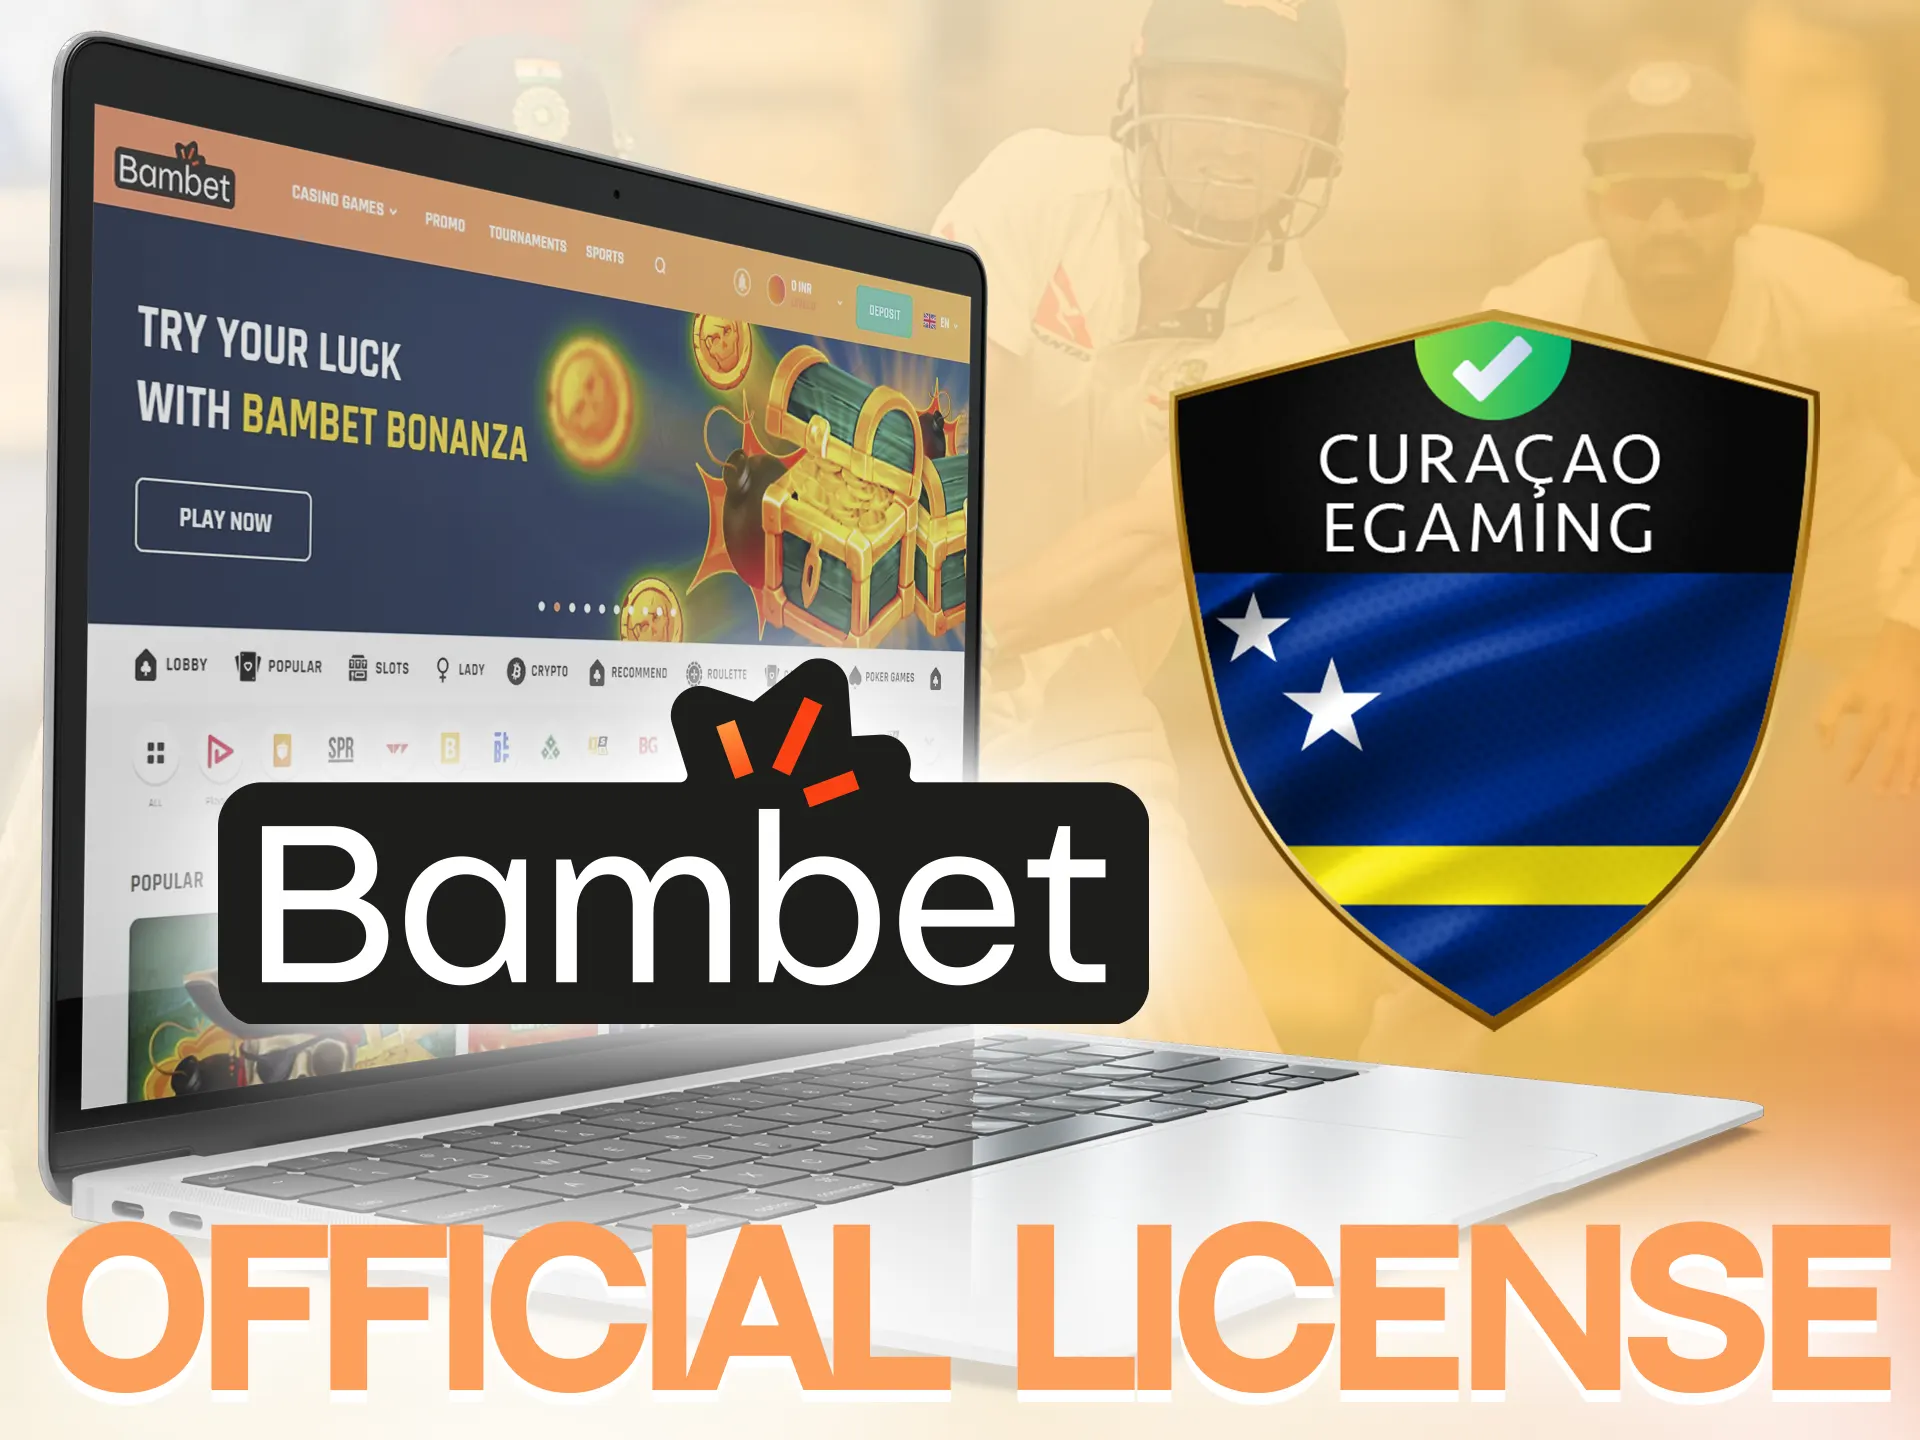 Bambet is officially licensed and safe for players.